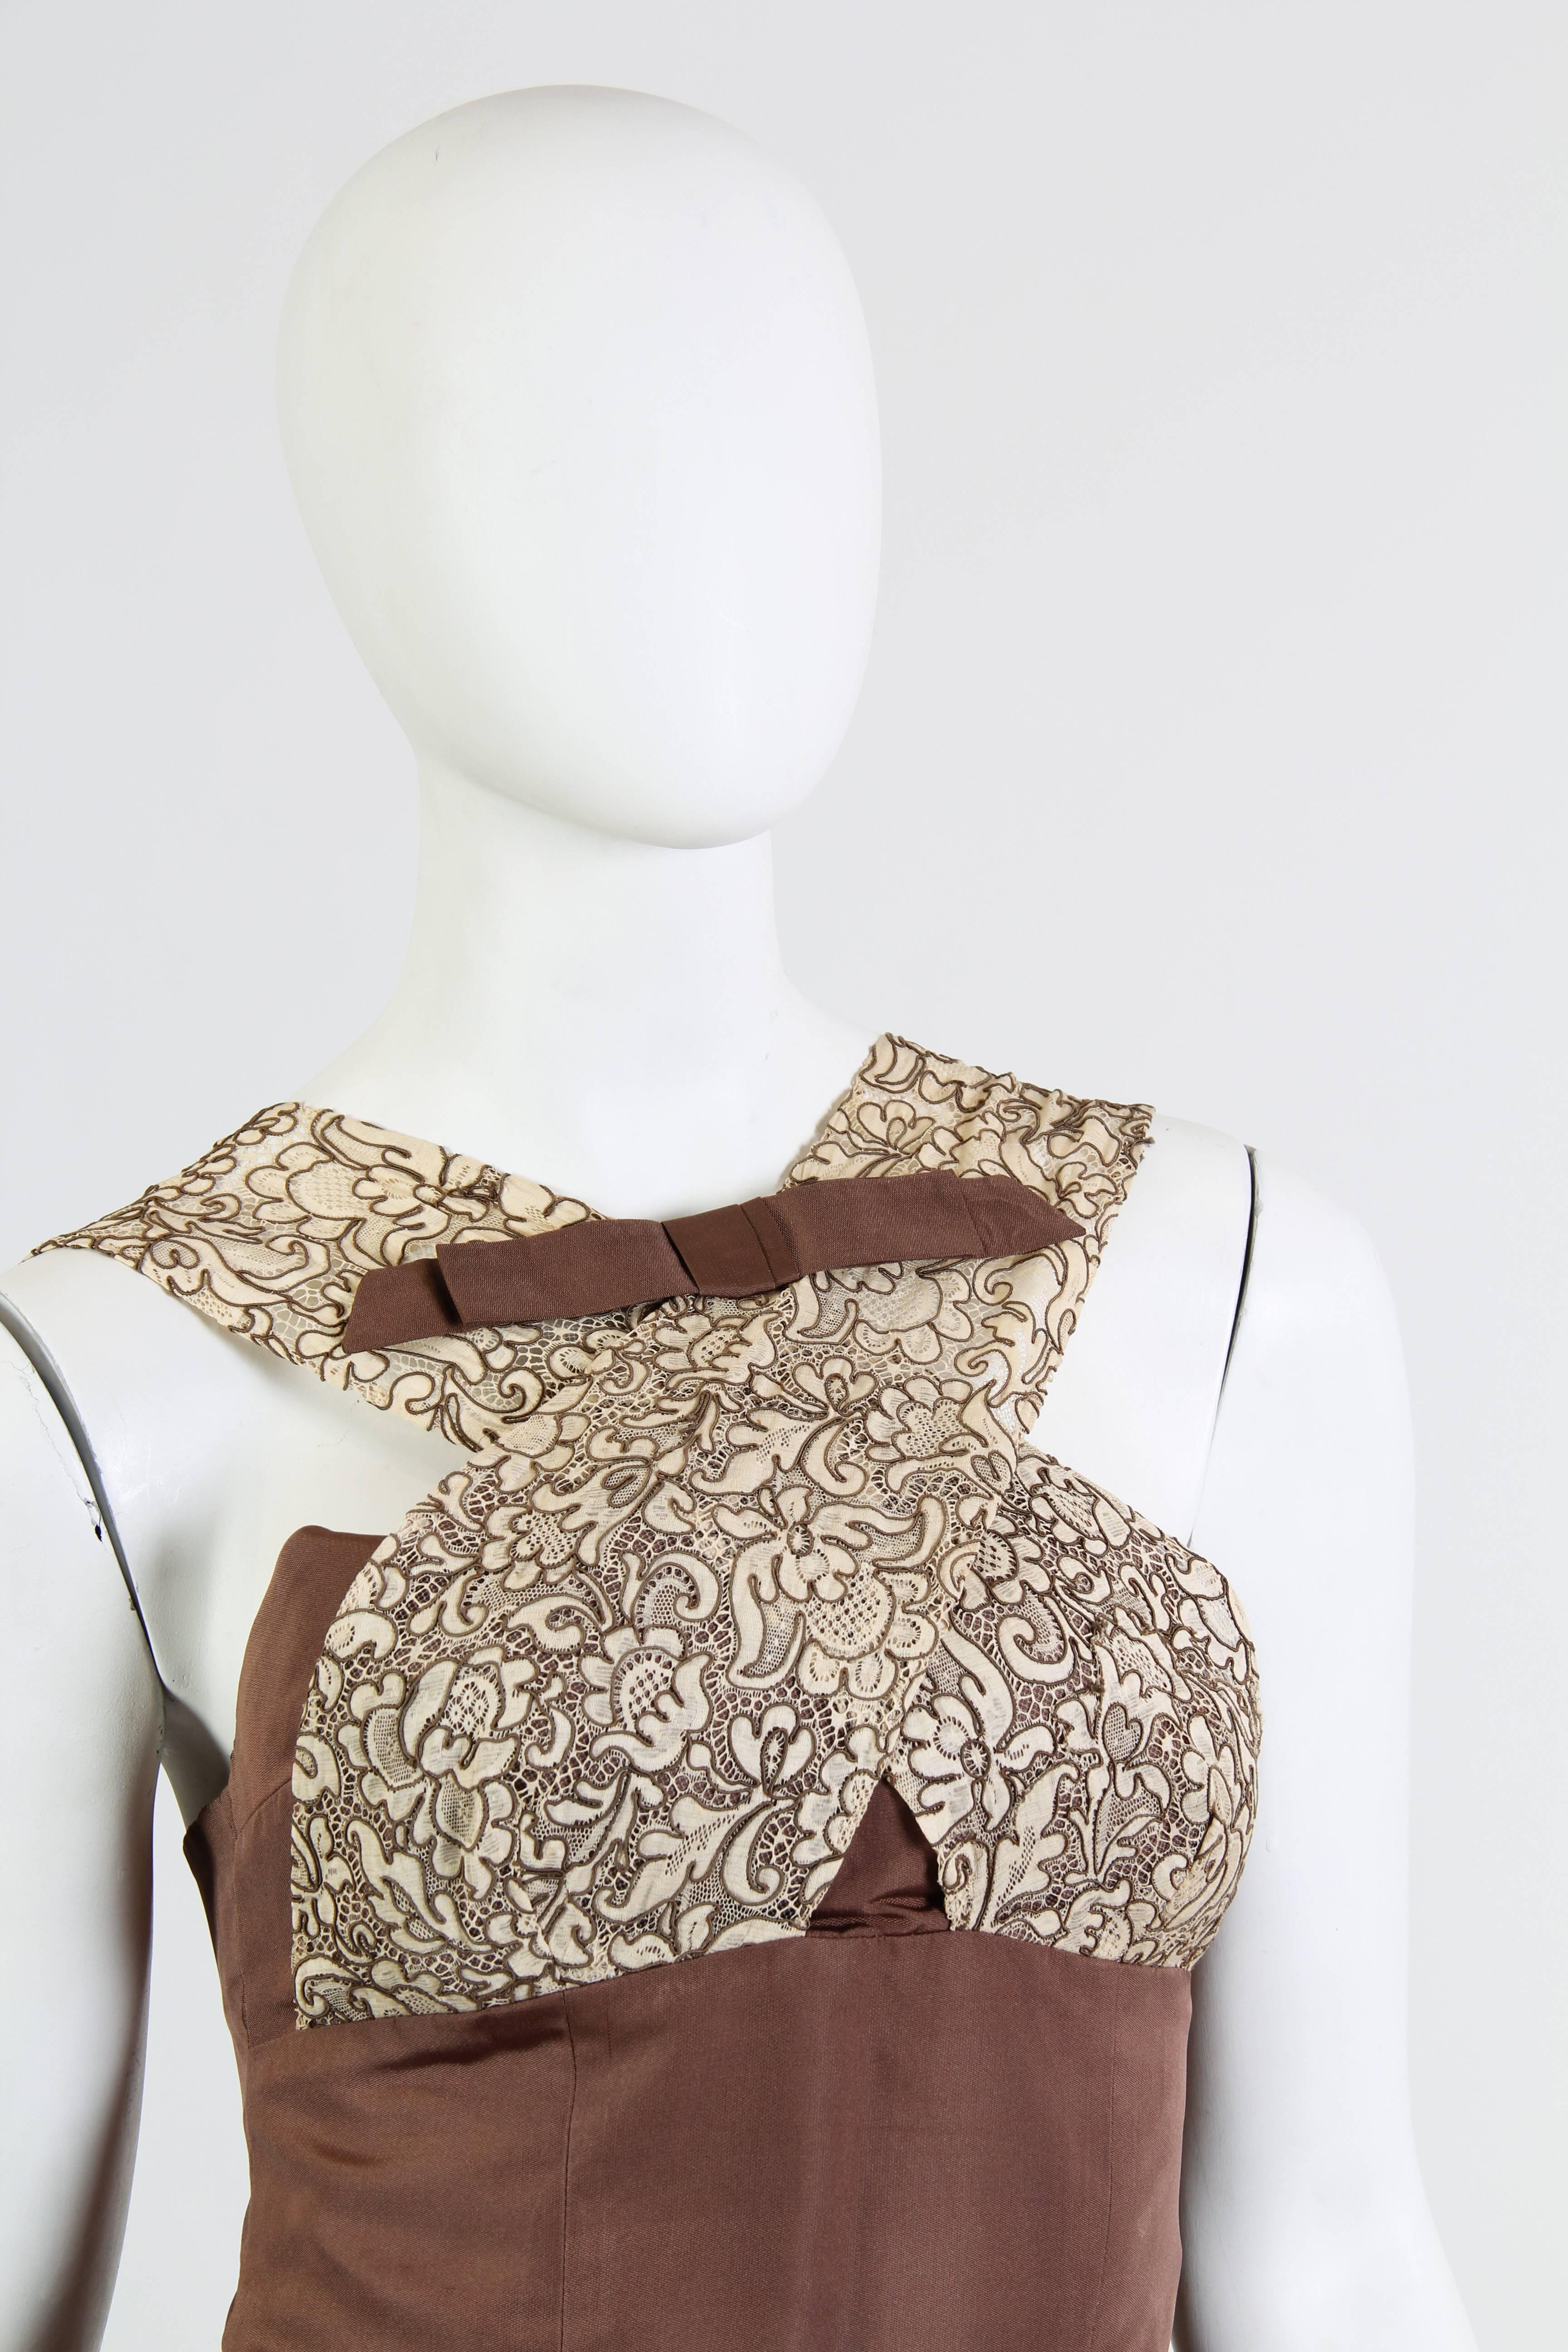 Women's 1950S OLEG CASSINI Chocolate Brown Silk Faille Jackie-O Style Dress With Lace B